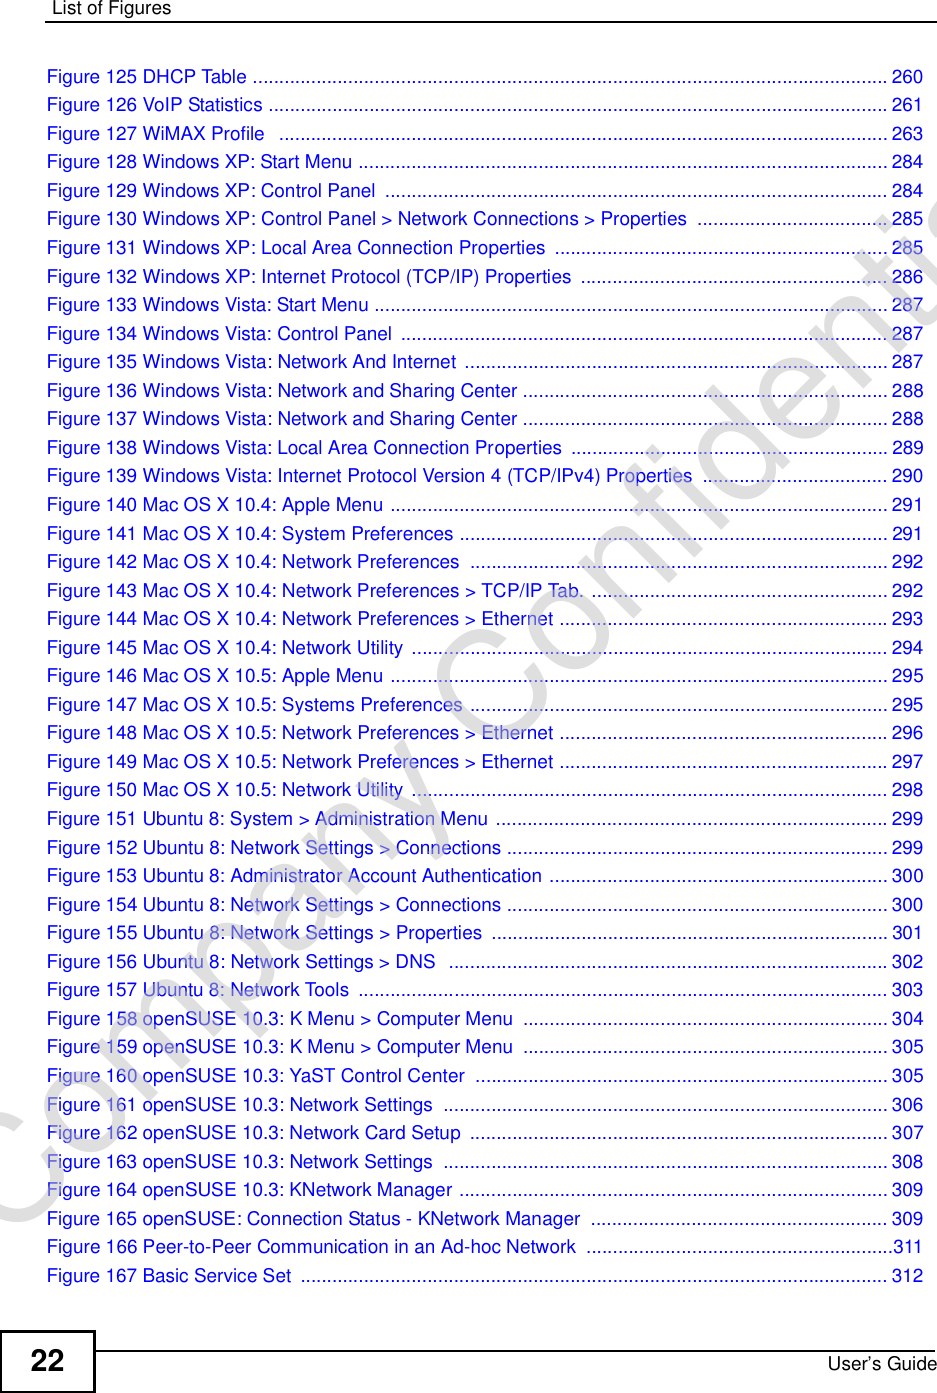 List of FiguresUser’s Guide22Figure 125 DHCP Table ........................................................................................................................260Figure 126 VoIP Statistics .....................................................................................................................261Figure 127 WiMAX Profile  ...................................................................................................................263Figure 128 Windows XP: Start Menu ....................................................................................................284Figure 129 Windows XP: Control Panel ...............................................................................................284Figure 130 Windows XP: Control Panel &gt; Network Connections &gt; Properties ....................................285Figure 131 Windows XP: Local Area Connection Properties ...............................................................285Figure 132 Windows XP: Internet Protocol (TCP/IP) Properties ..........................................................286Figure 133 Windows Vista: Start Menu .................................................................................................287Figure 134 Windows Vista: Control Panel ............................................................................................287Figure 135 Windows Vista: Network And Internet ................................................................................287Figure 136 Windows Vista: Network and Sharing Center .....................................................................288Figure 137 Windows Vista: Network and Sharing Center .....................................................................288Figure 138 Windows Vista: Local Area Connection Properties ............................................................289Figure 139 Windows Vista: Internet Protocol Version 4 (TCP/IPv4) Properties ...................................290Figure 140 Mac OS X 10.4: Apple Menu ..............................................................................................291Figure 141 Mac OS X 10.4: System Preferences .................................................................................291Figure 142 Mac OS X 10.4: Network Preferences ...............................................................................292Figure 143 Mac OS X 10.4: Network Preferences &gt; TCP/IP Tab. ........................................................292Figure 144 Mac OS X 10.4: Network Preferences &gt; Ethernet ..............................................................293Figure 145 Mac OS X 10.4: Network Utility ..........................................................................................294Figure 146 Mac OS X 10.5: Apple Menu ..............................................................................................295Figure 147 Mac OS X 10.5: Systems Preferences ...............................................................................295Figure 148 Mac OS X 10.5: Network Preferences &gt; Ethernet ..............................................................296Figure 149 Mac OS X 10.5: Network Preferences &gt; Ethernet ..............................................................297Figure 150 Mac OS X 10.5: Network Utility ..........................................................................................298Figure 151 Ubuntu 8: System &gt; Administration Menu ..........................................................................299Figure 152 Ubuntu 8: Network Settings &gt; Connections ........................................................................299Figure 153 Ubuntu 8: Administrator Account Authentication ................................................................300Figure 154 Ubuntu 8: Network Settings &gt; Connections ........................................................................300Figure 155 Ubuntu 8: Network Settings &gt; Properties ...........................................................................301Figure 156 Ubuntu 8: Network Settings &gt; DNS  ...................................................................................302Figure 157 Ubuntu 8: Network Tools ....................................................................................................303Figure 158 openSUSE 10.3: K Menu &gt; Computer Menu .....................................................................304Figure 159 openSUSE 10.3: K Menu &gt; Computer Menu .....................................................................305Figure 160 openSUSE 10.3: YaST Control Center ..............................................................................305Figure 161 openSUSE 10.3: Network Settings ....................................................................................306Figure 162 openSUSE 10.3: Network Card Setup ...............................................................................307Figure 163 openSUSE 10.3: Network Settings ....................................................................................308Figure 164 openSUSE 10.3: KNetwork Manager .................................................................................309Figure 165 openSUSE: Connection Status - KNetwork Manager ........................................................309Figure 166 Peer-to-Peer Communication in an Ad-hoc Network ..........................................................311Figure 167 Basic Service Set ...............................................................................................................312Company Confidential